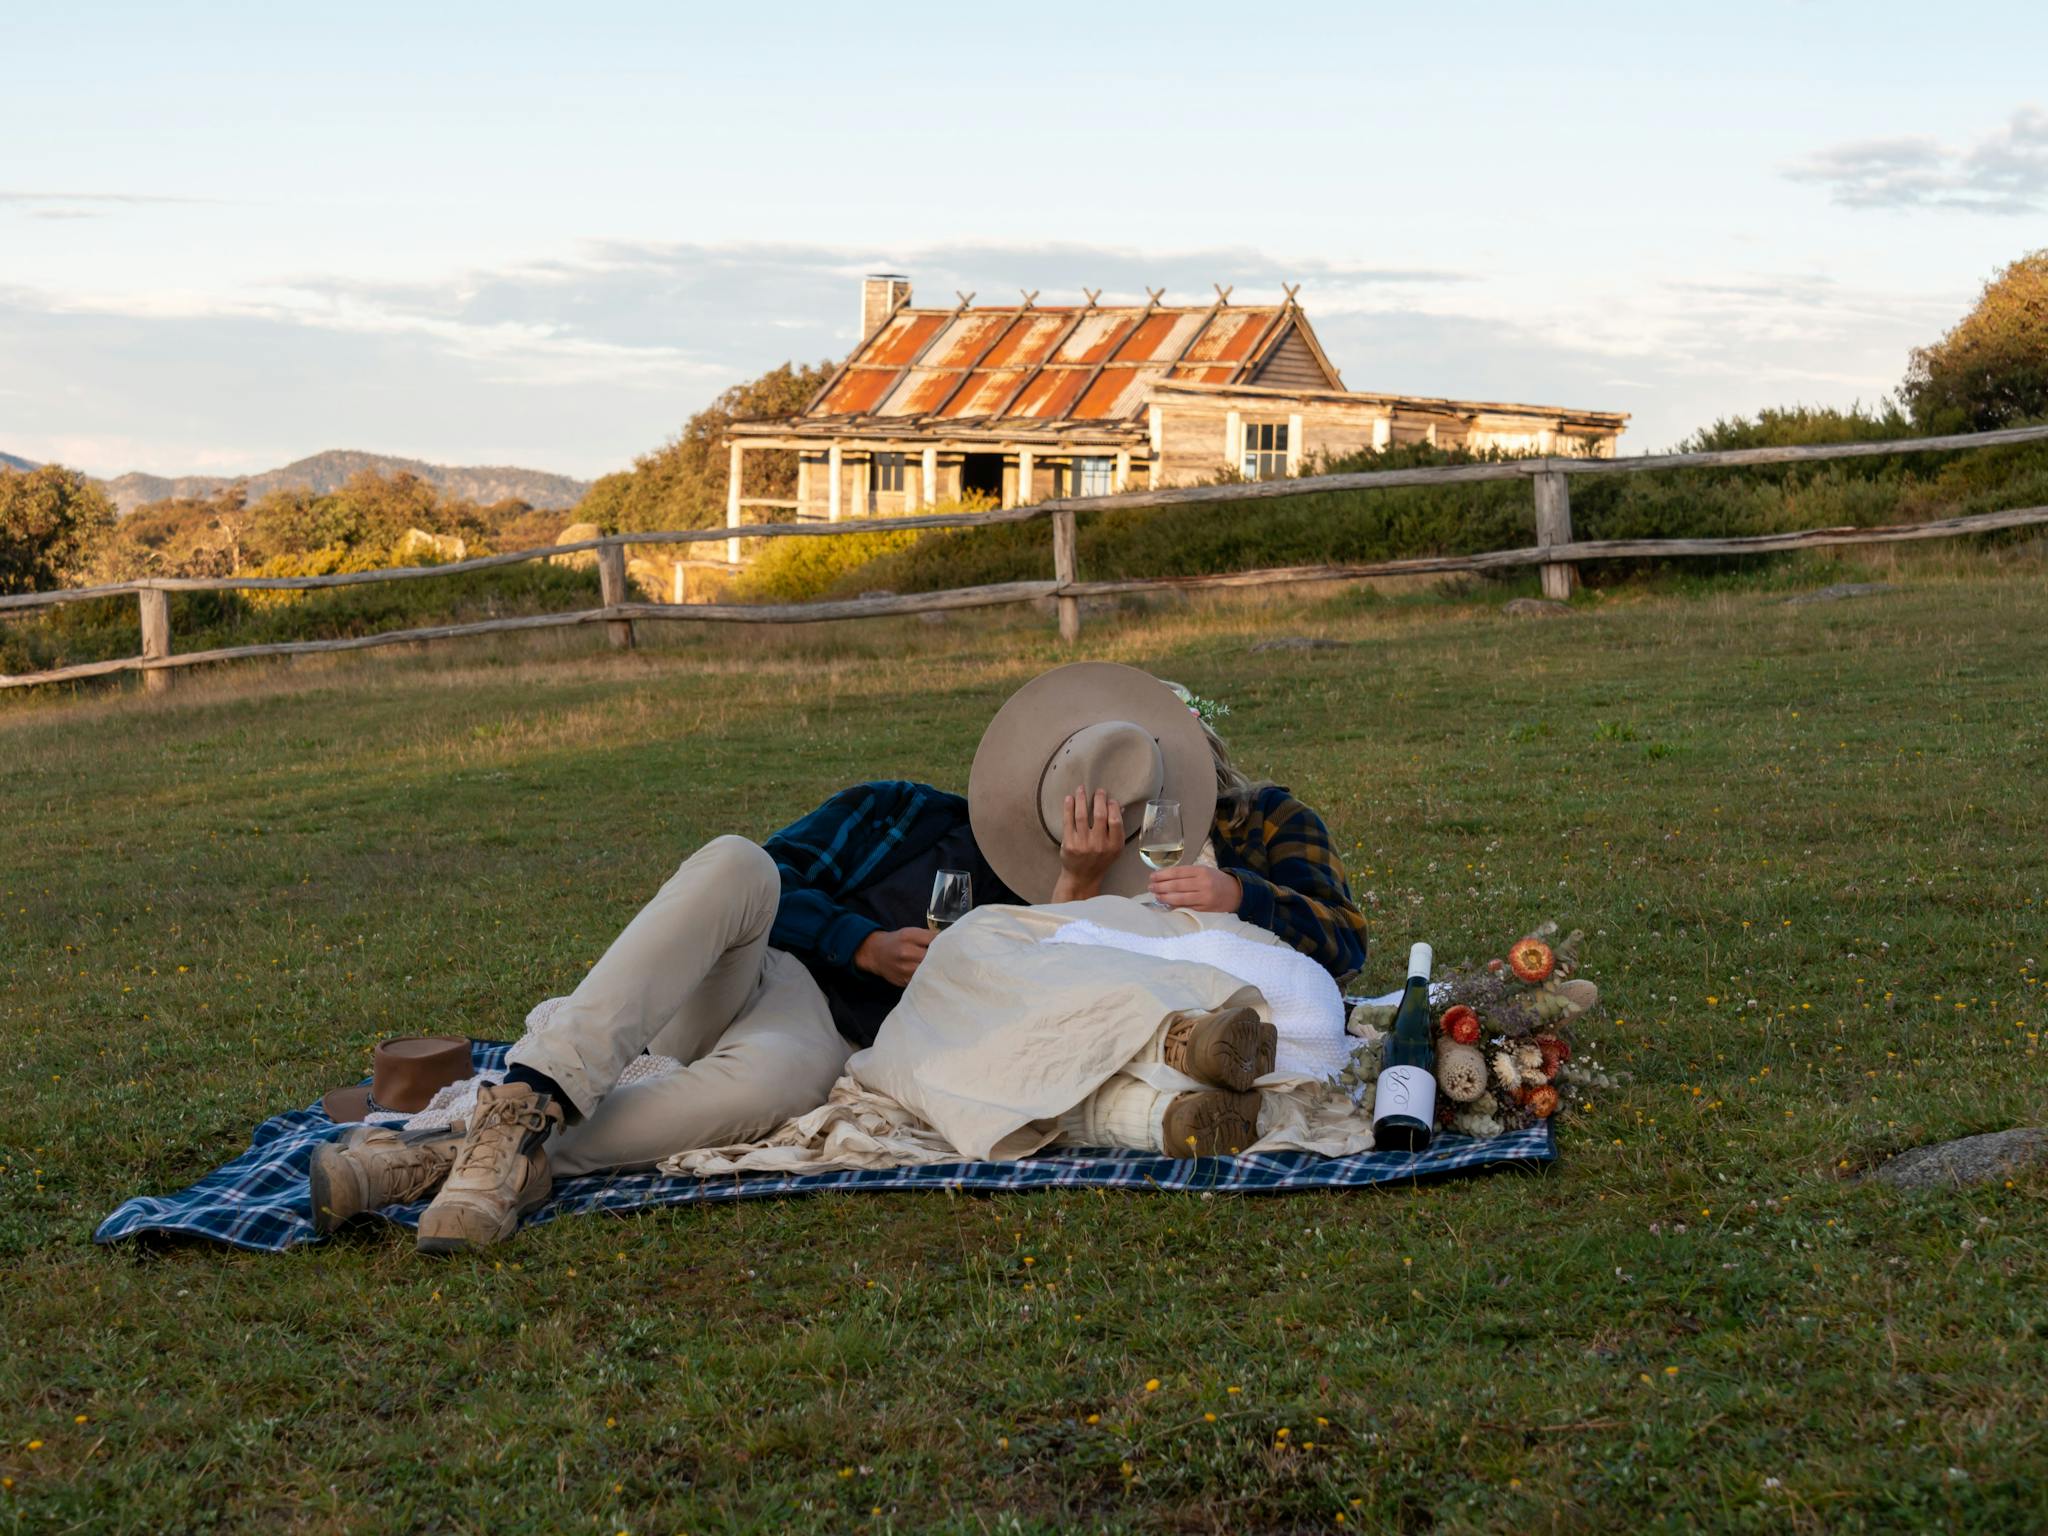 Just married couple relaxing on a picnic blanket in front of Craig's Hut with a glass of wine.